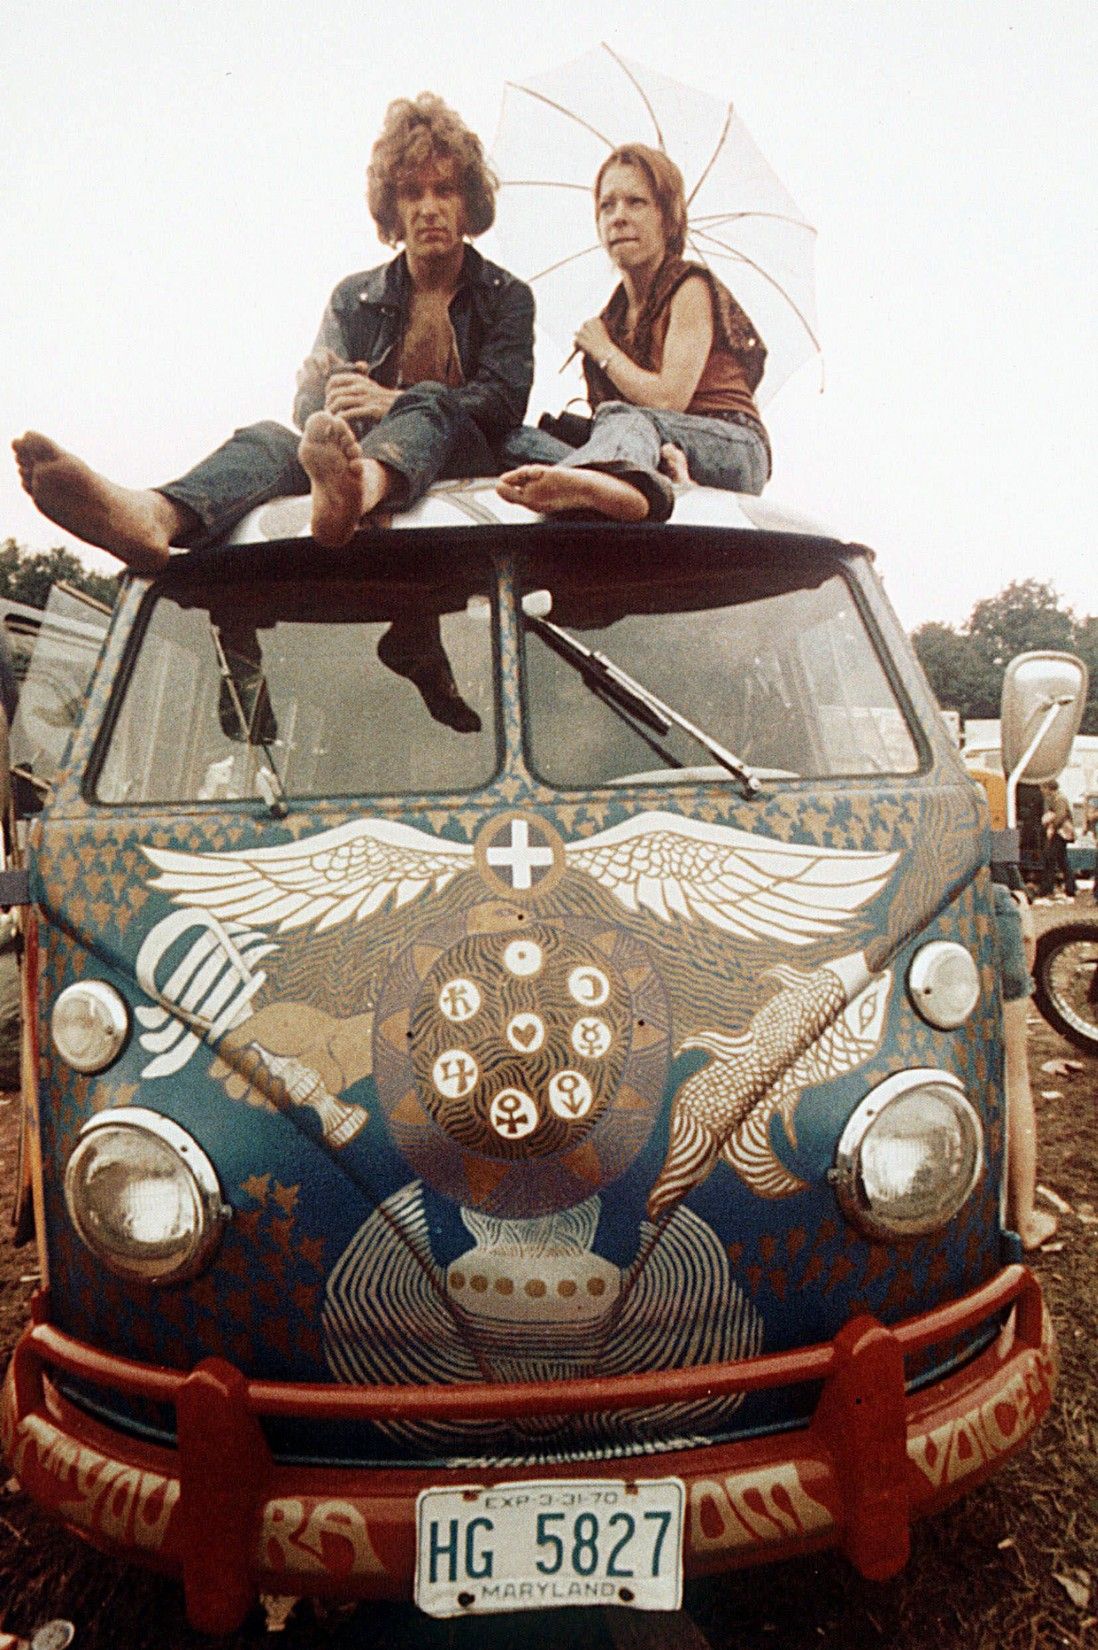 Woodstock 1969: Photo From the Festival